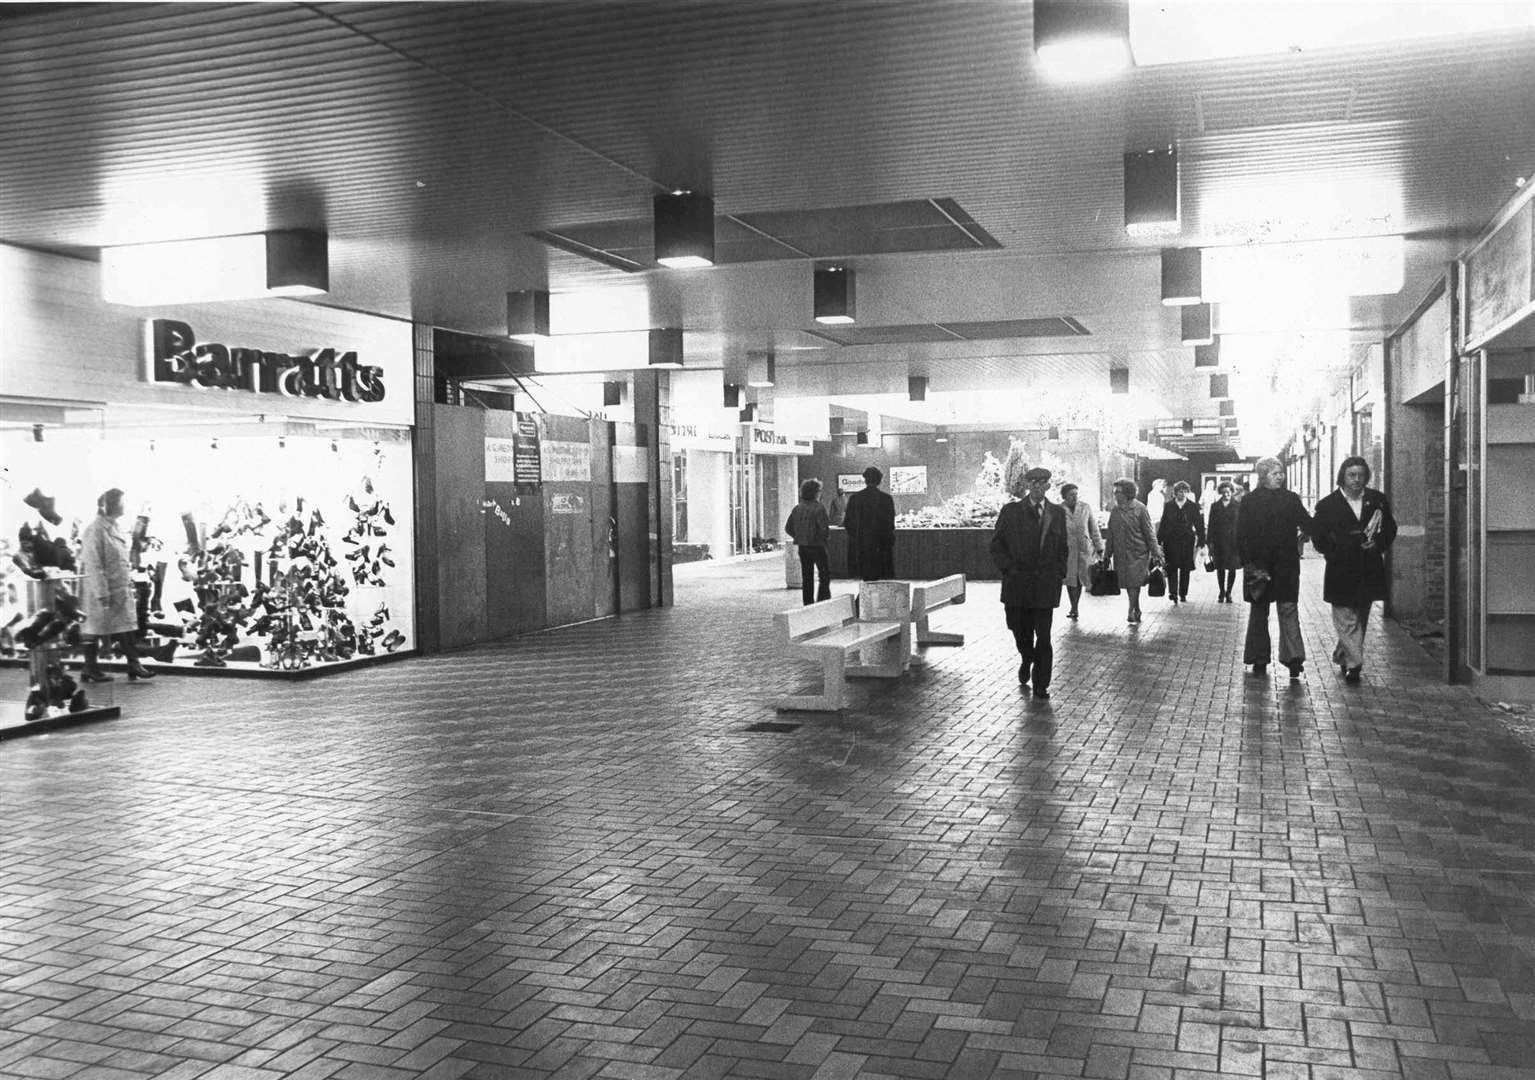 Inside the Forum shopping centre in Sittingbourne in October 1974